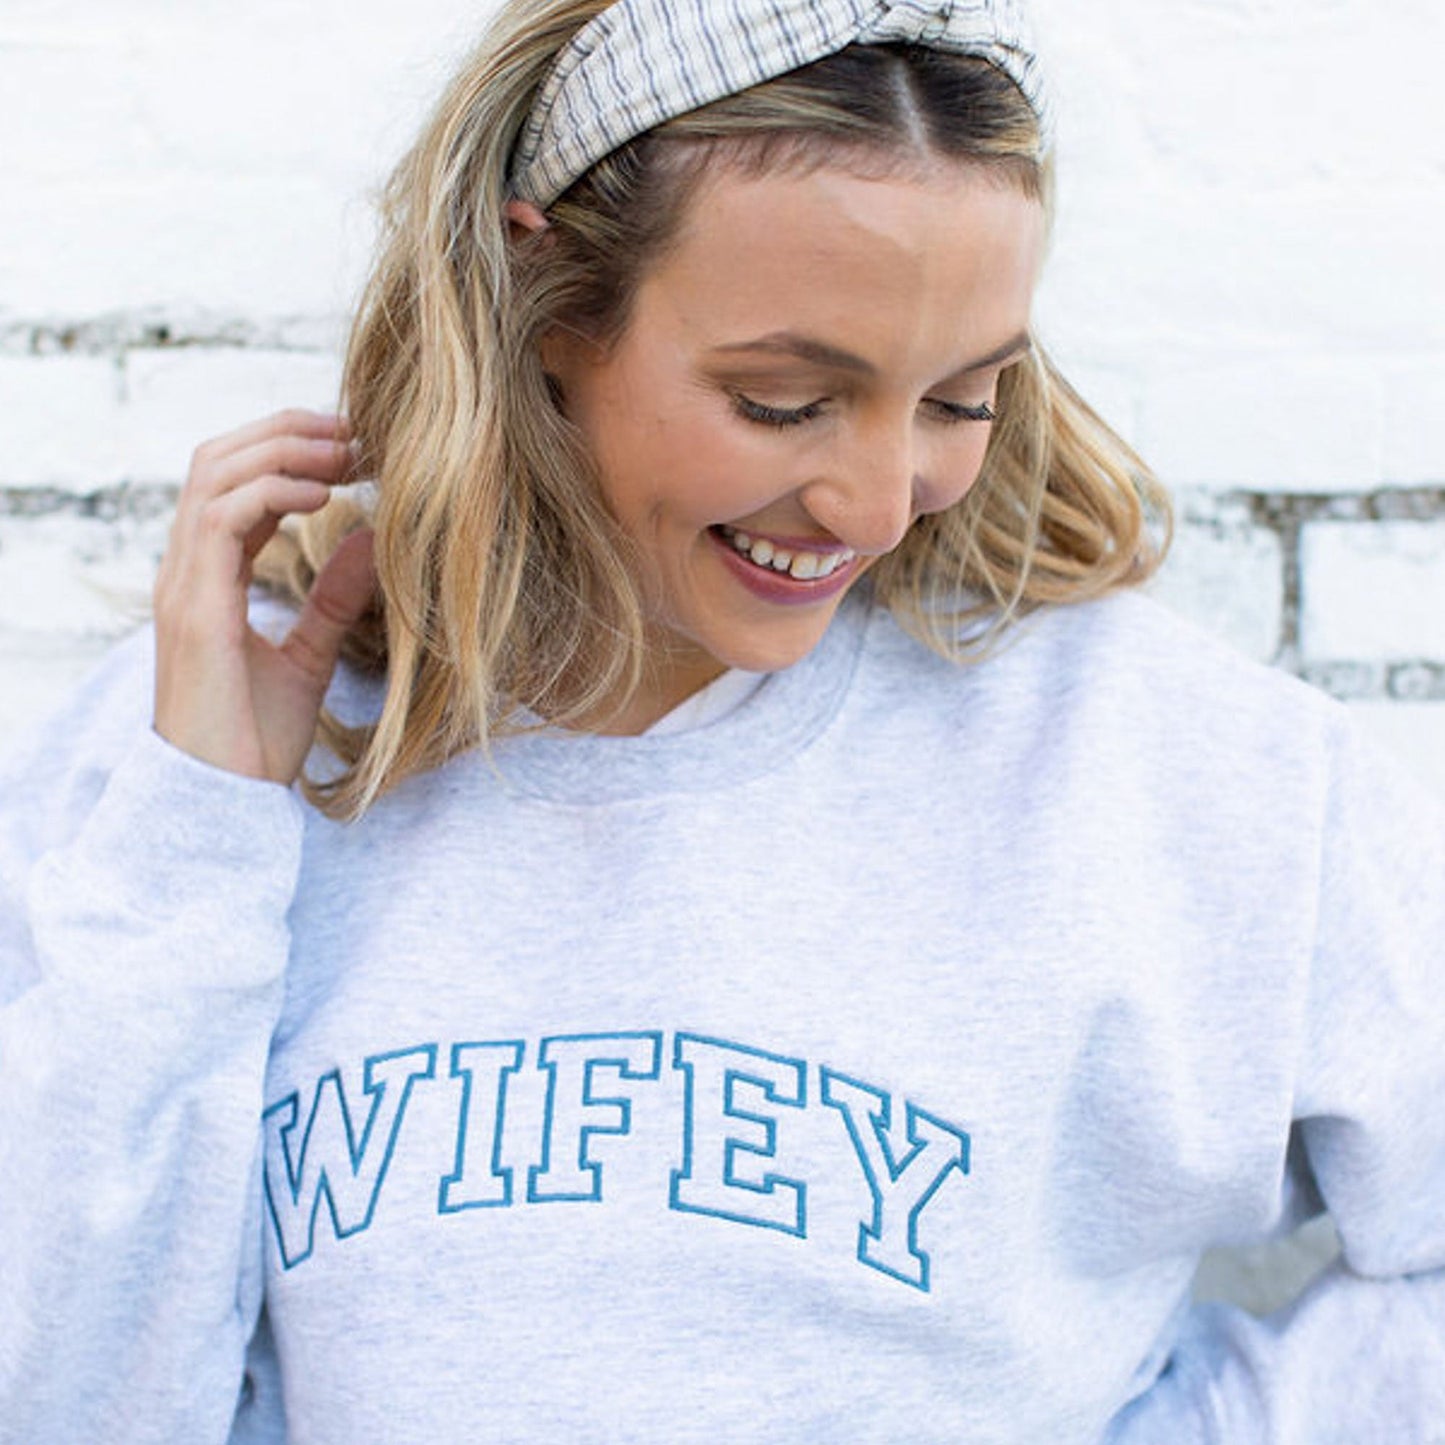 woman smiling and wearing a sweatshirt with wifey embroidered in french blue thread across the chest